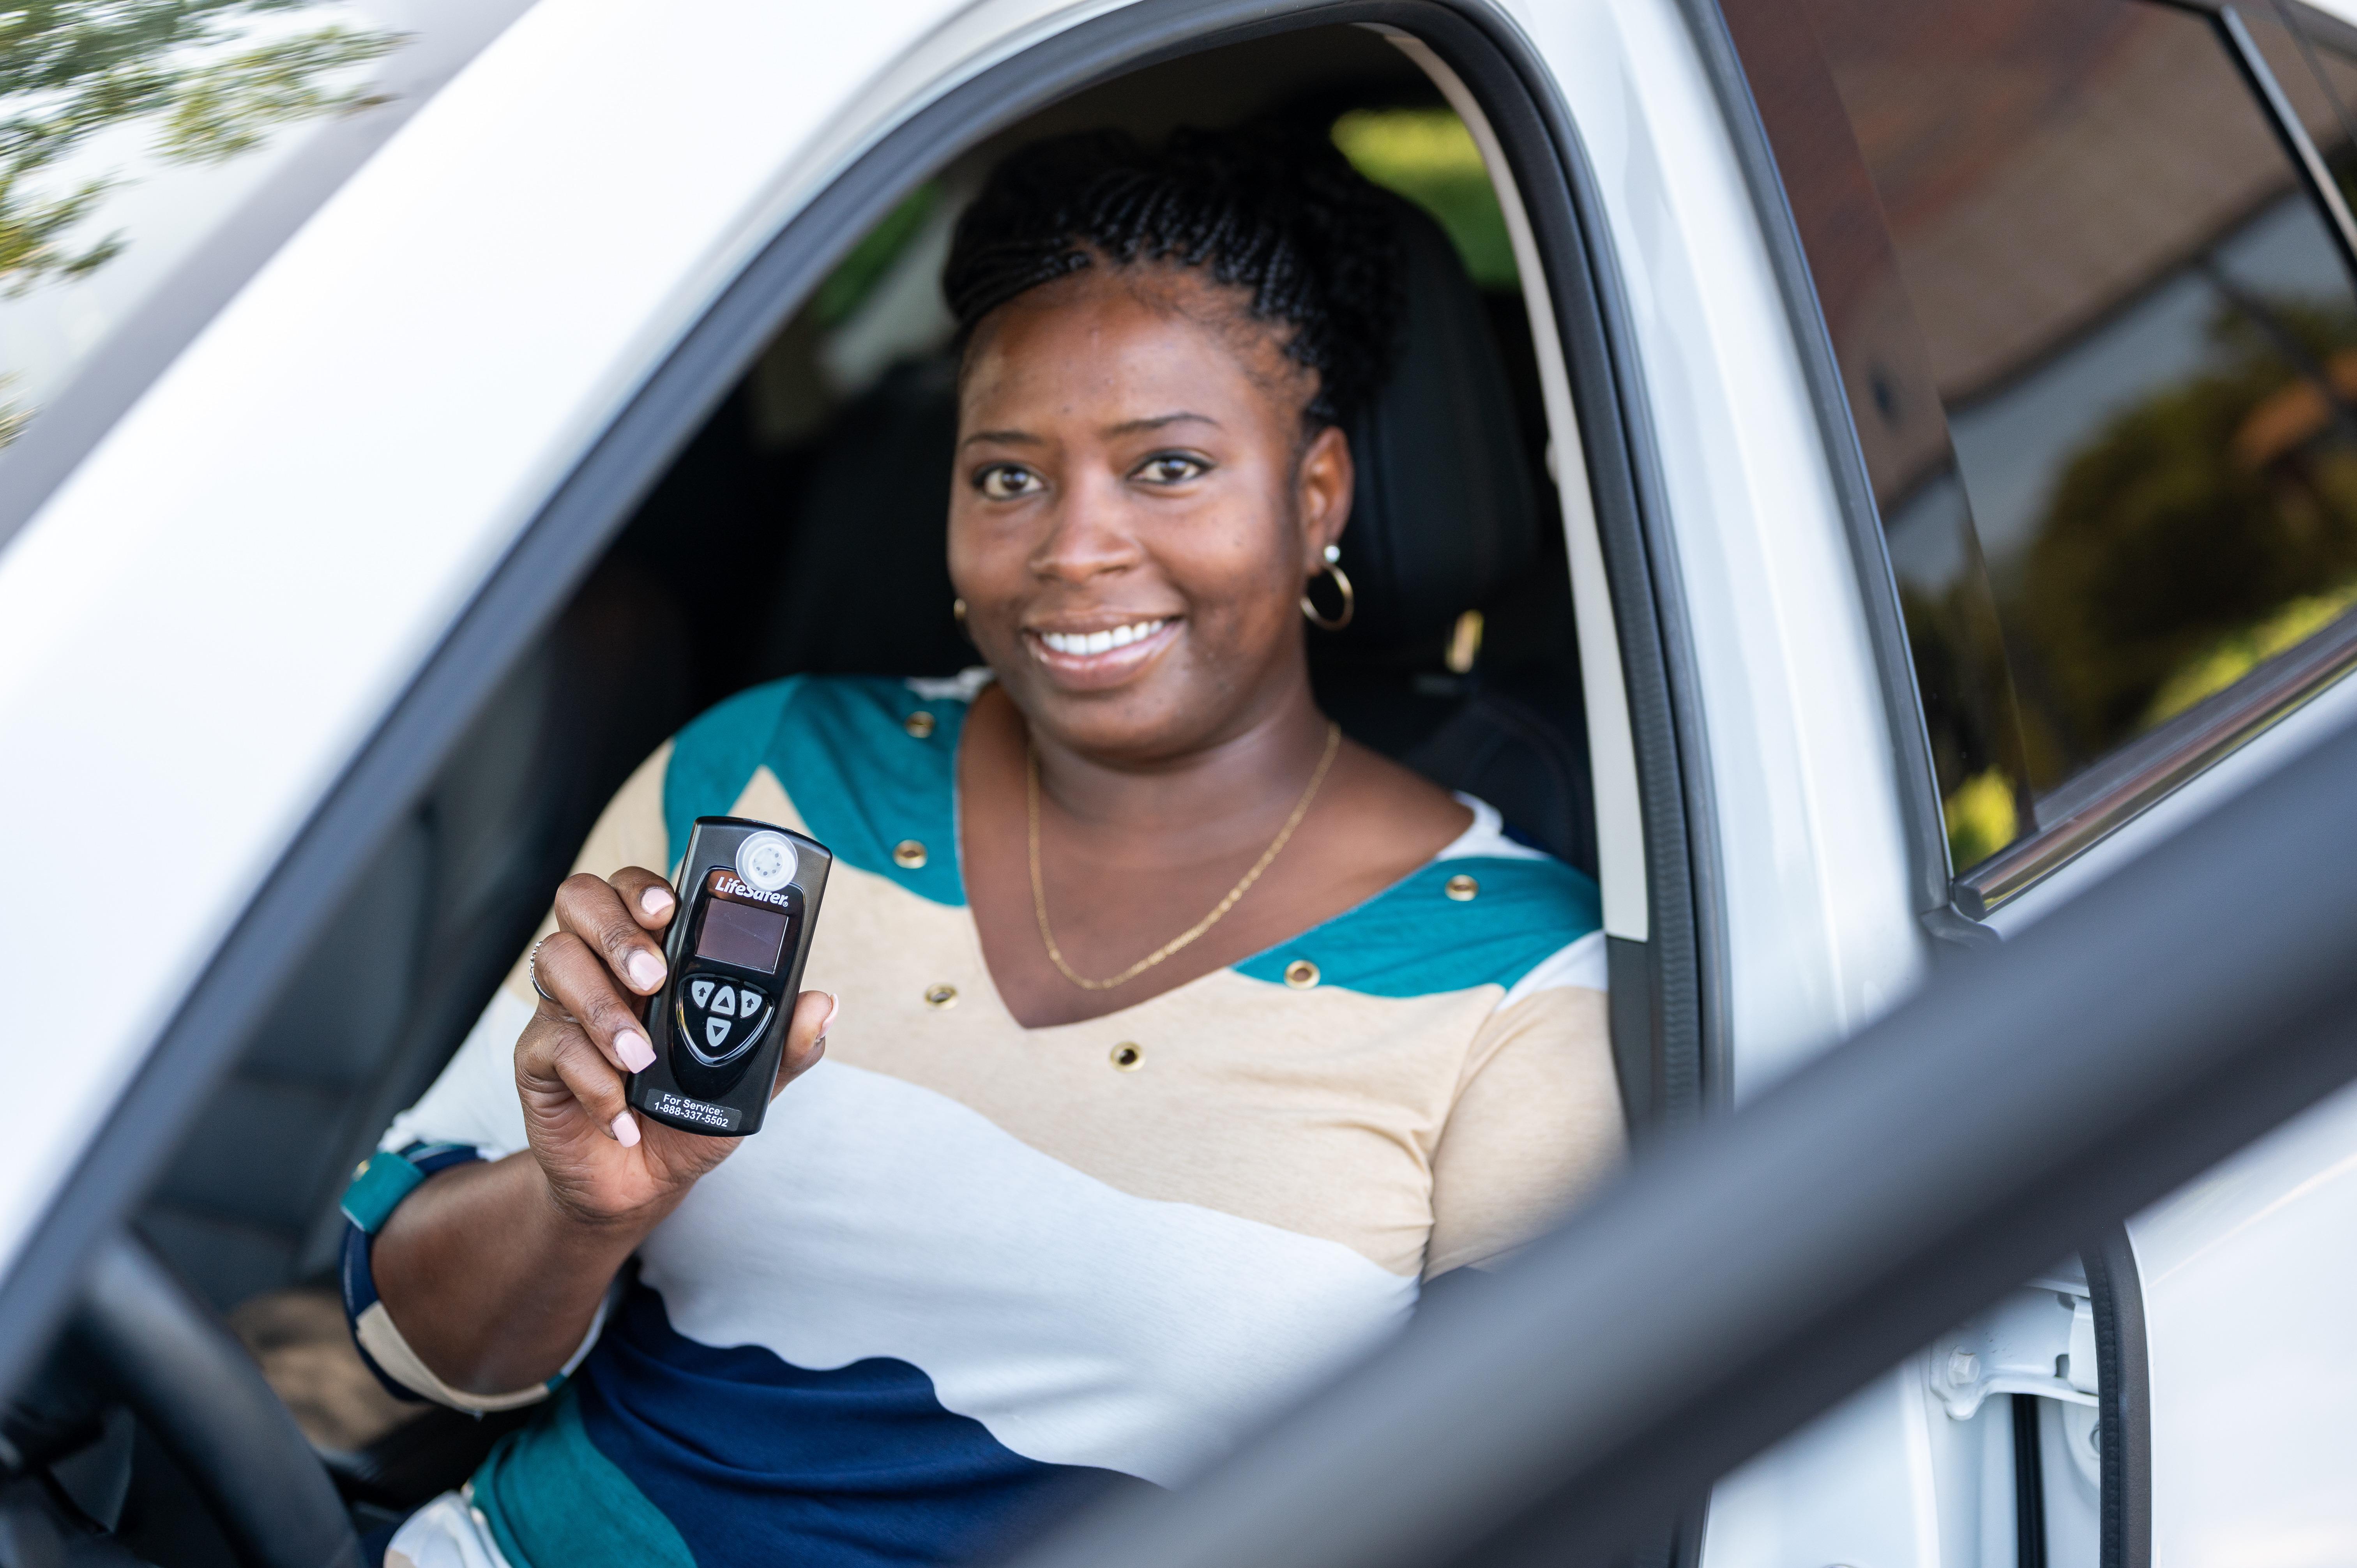 LifeSafer's ignition interlock device is the most discreet and easiest to use car breathalyzer devic LifeSafer Ignition Interlock Saint Paul (651)309-8411